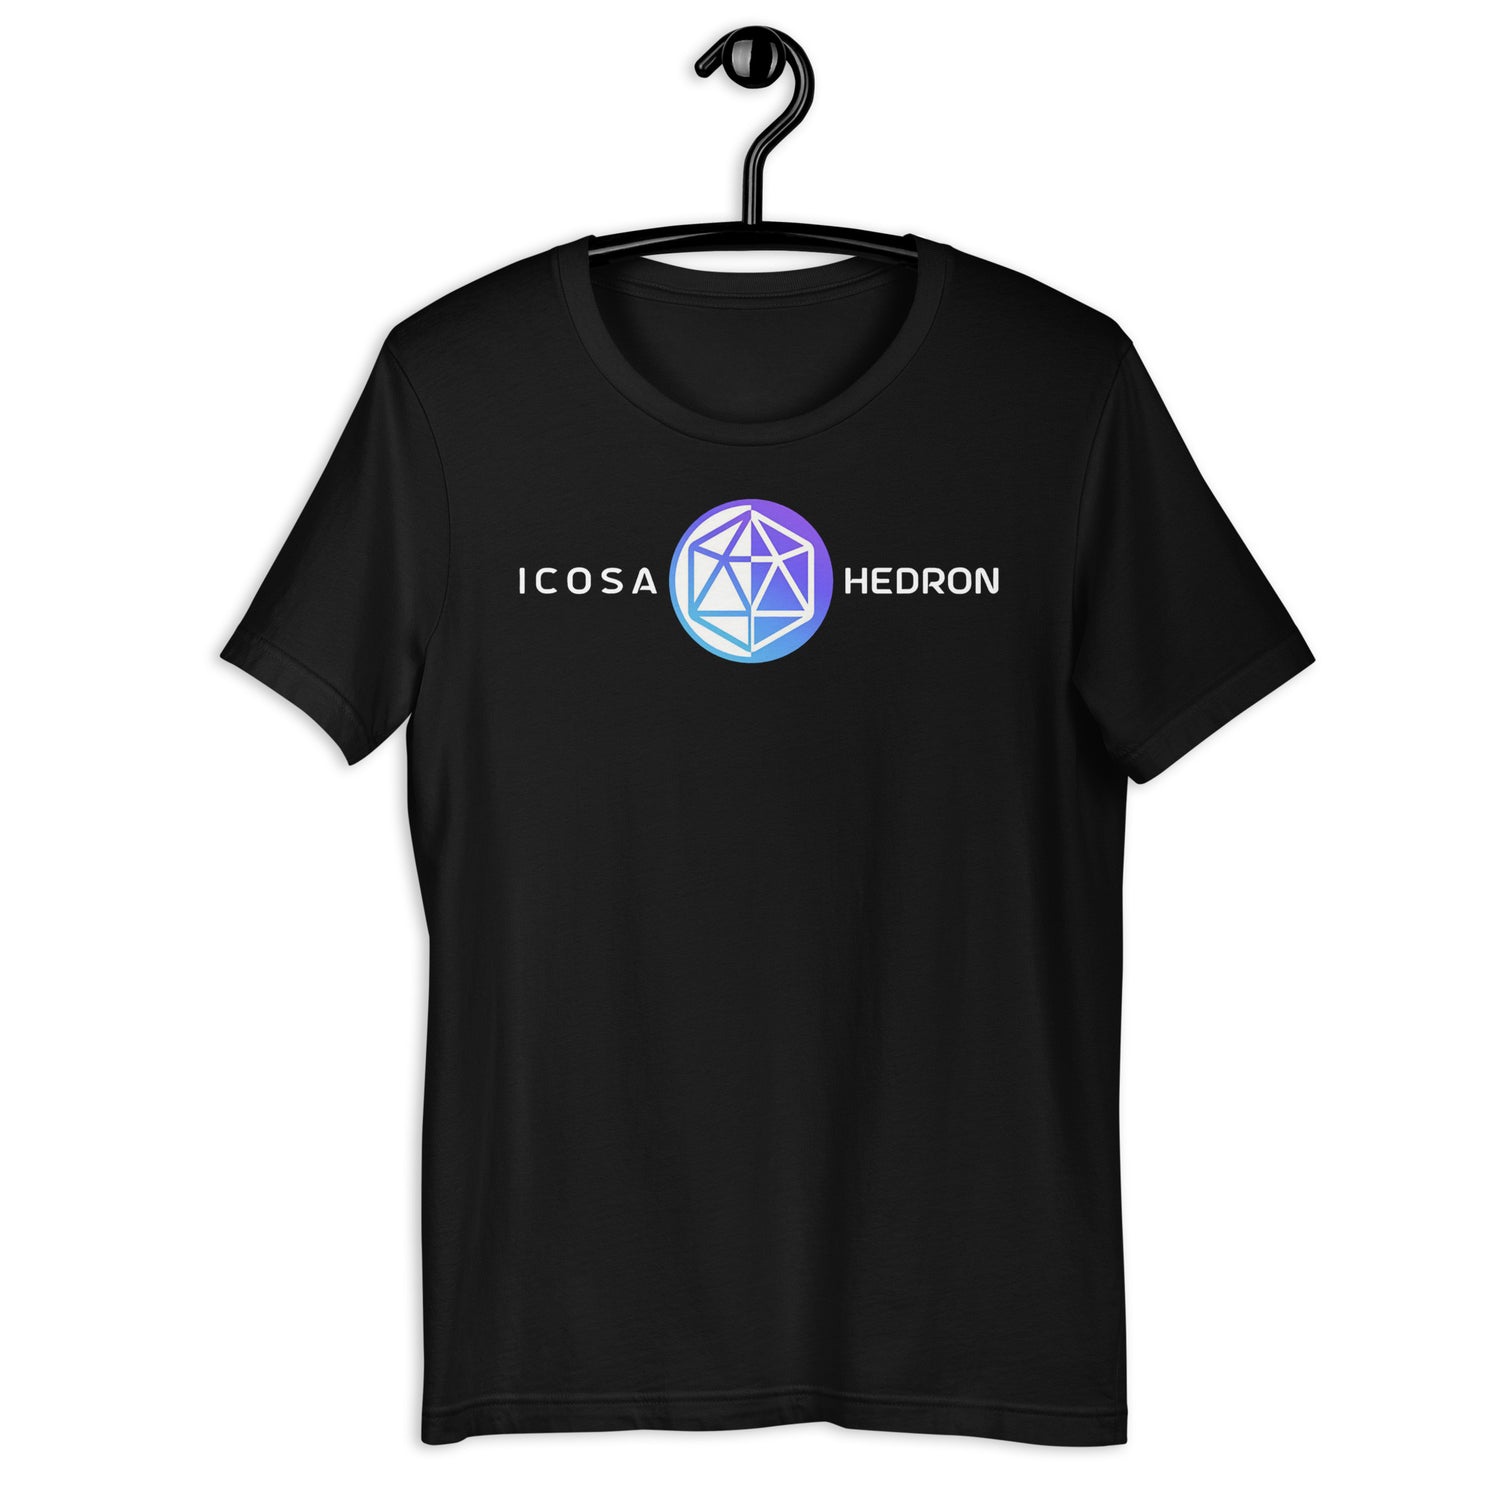 Hedron Clothing and Gear